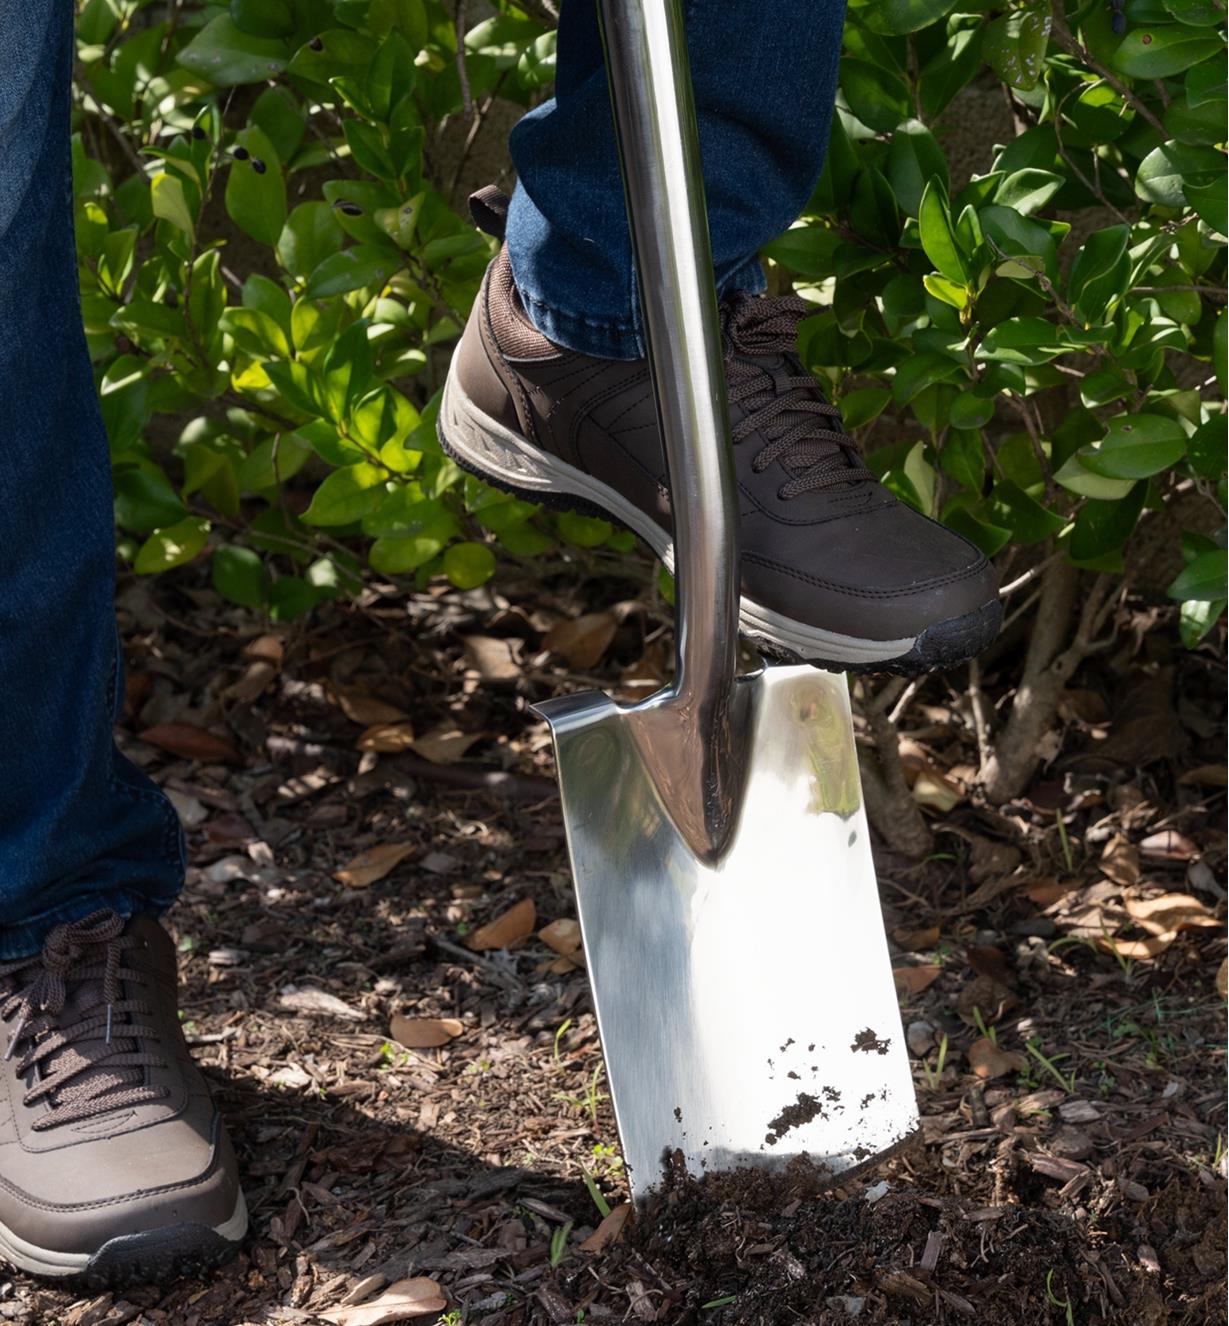 A gardener uses her foot to push the head of the border spade into the ground